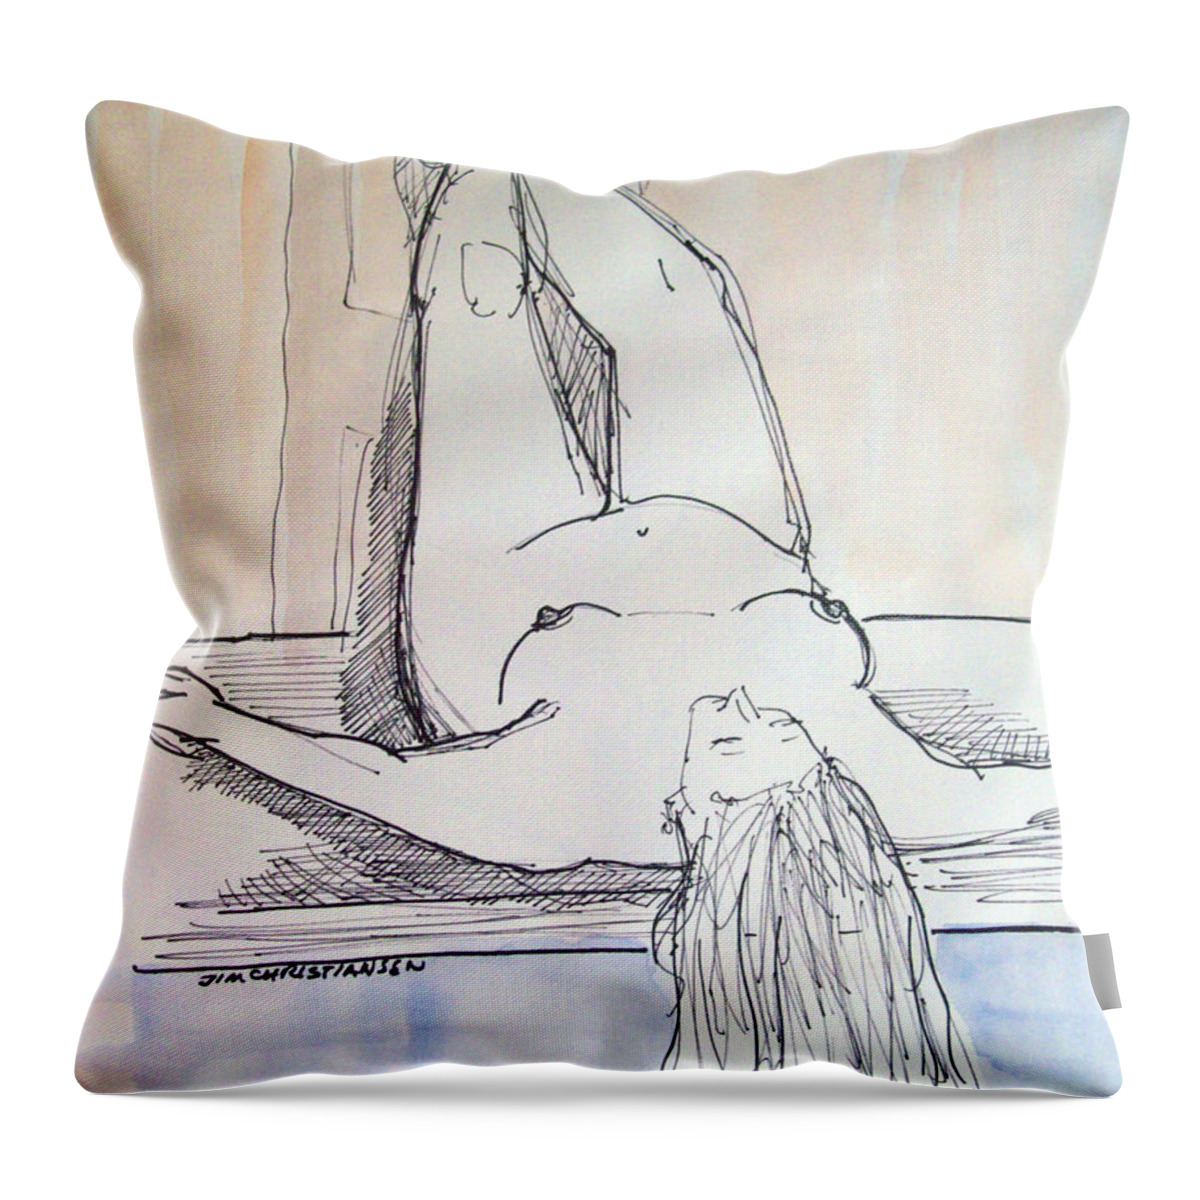 Ink Throw Pillow featuring the drawing Almost A Sauna by James Christiansen